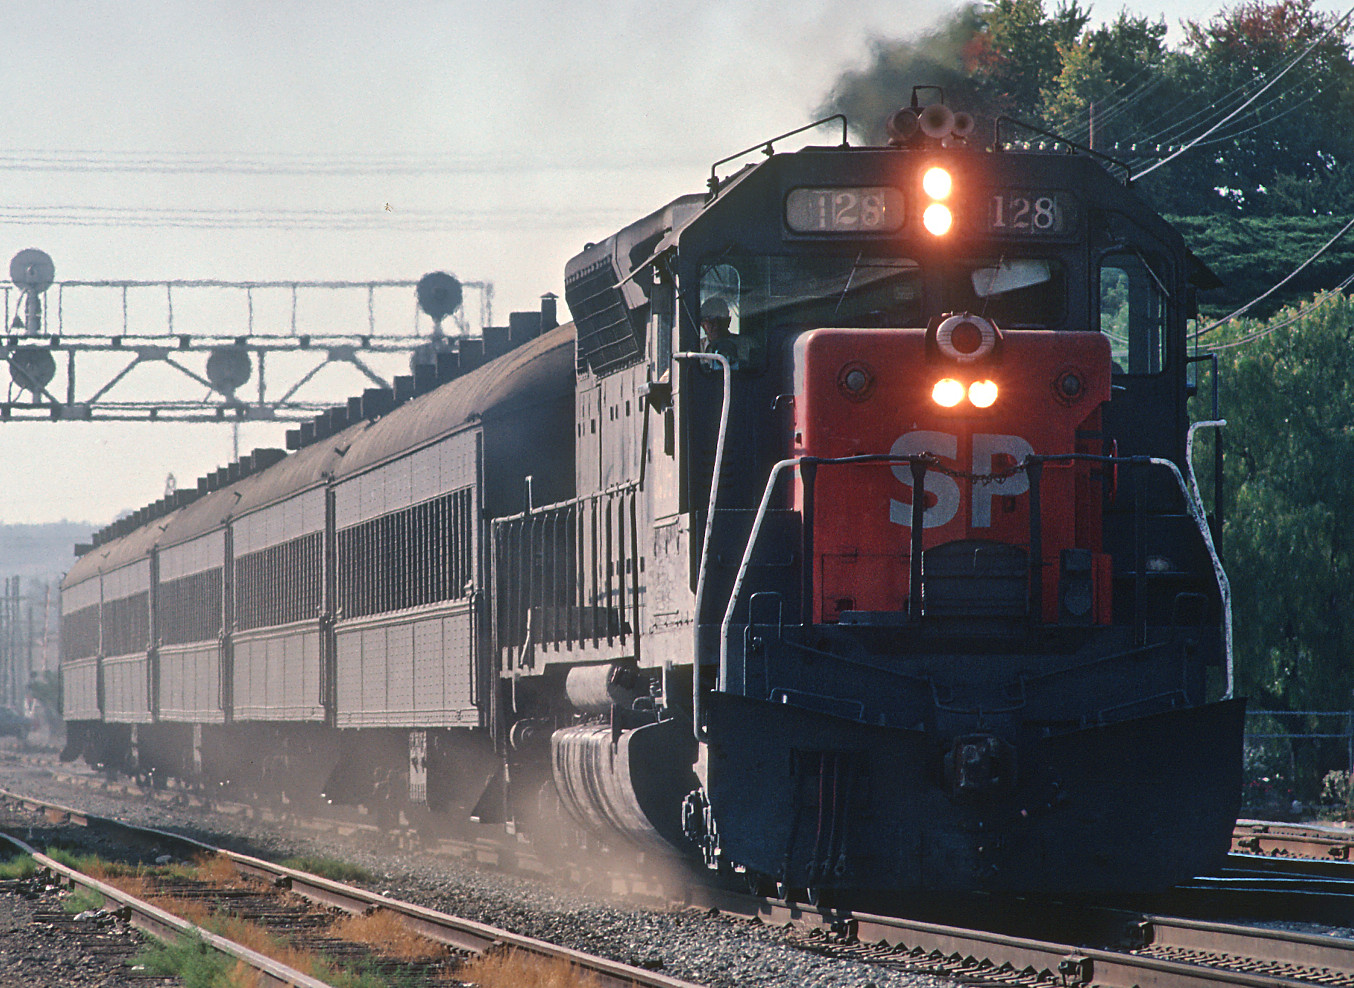 A Southern Pacific Railroad commuter train in Redwood City, circa August 1980. The train is grey with a bright red square painted on the front containing the letters 'SP' in white. 